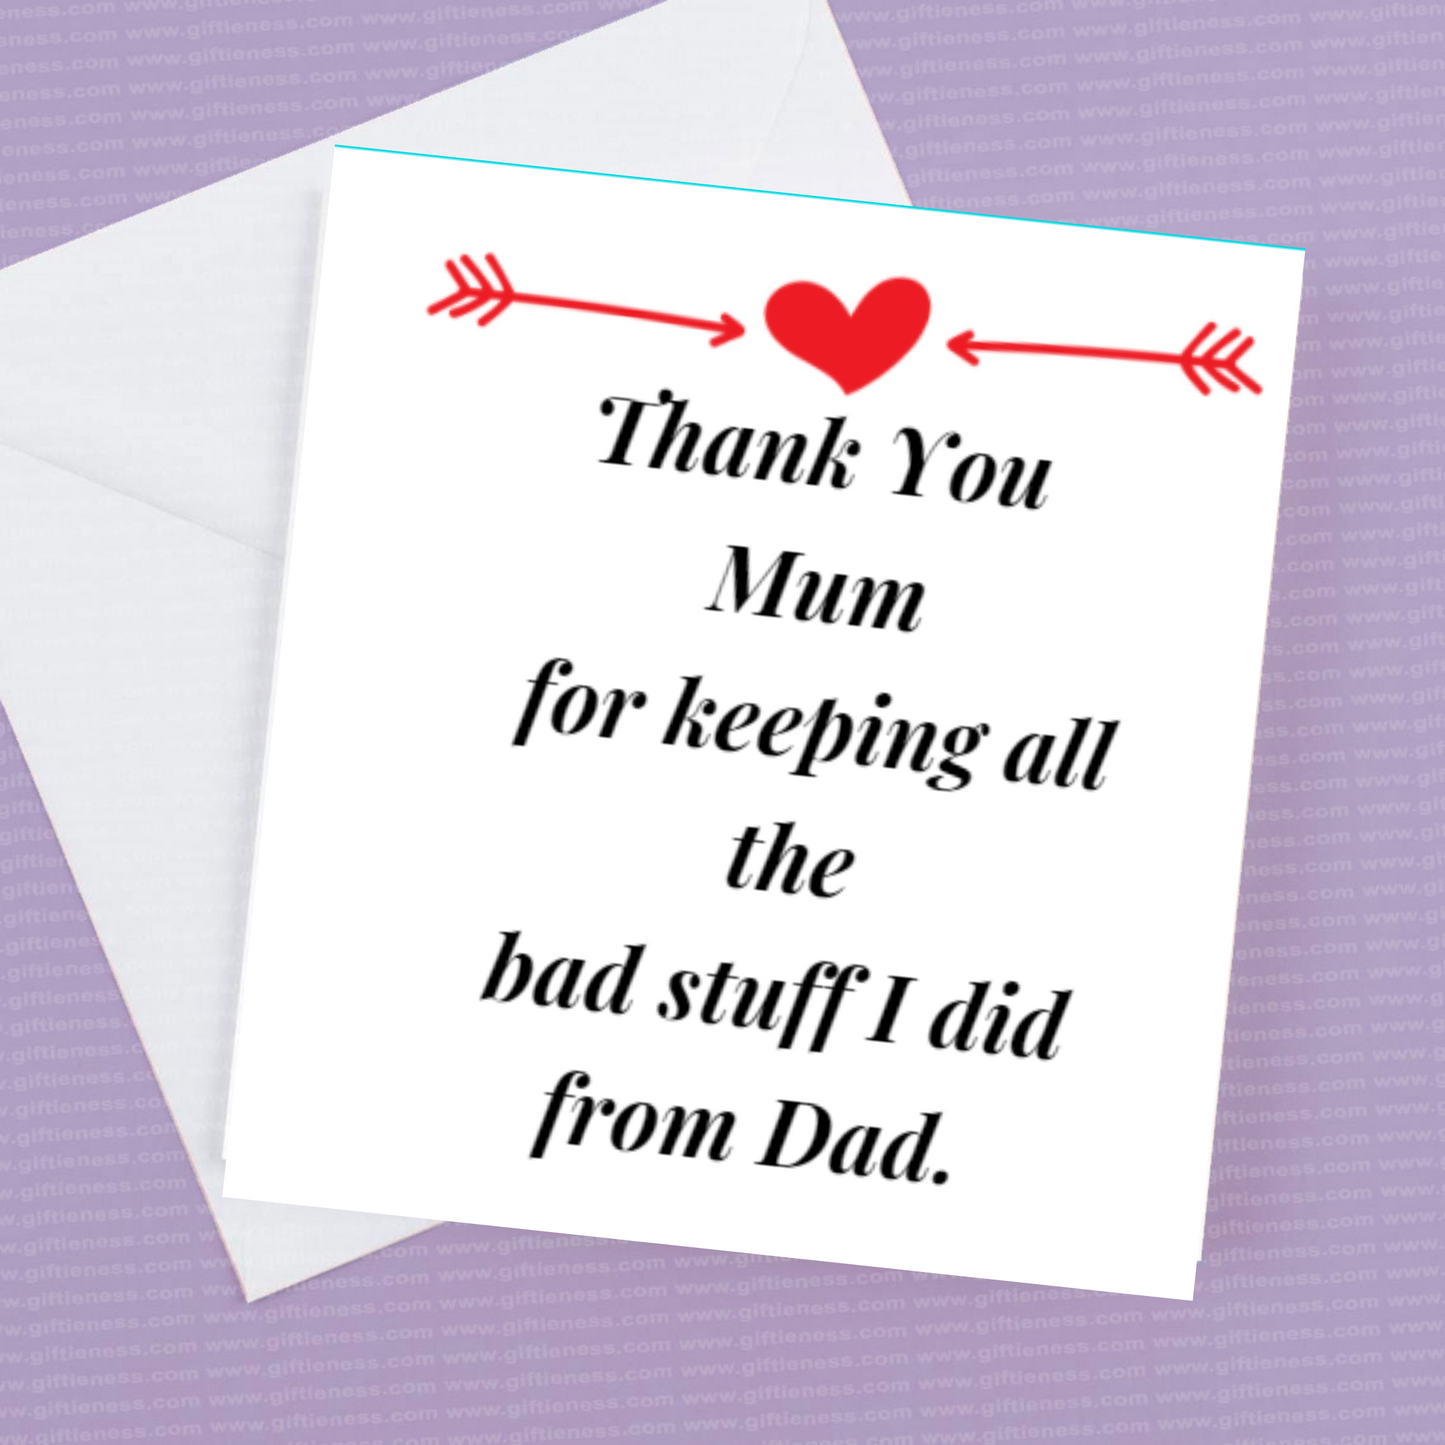 Thank you mum for keeping all the bad stuff I did from Dad.